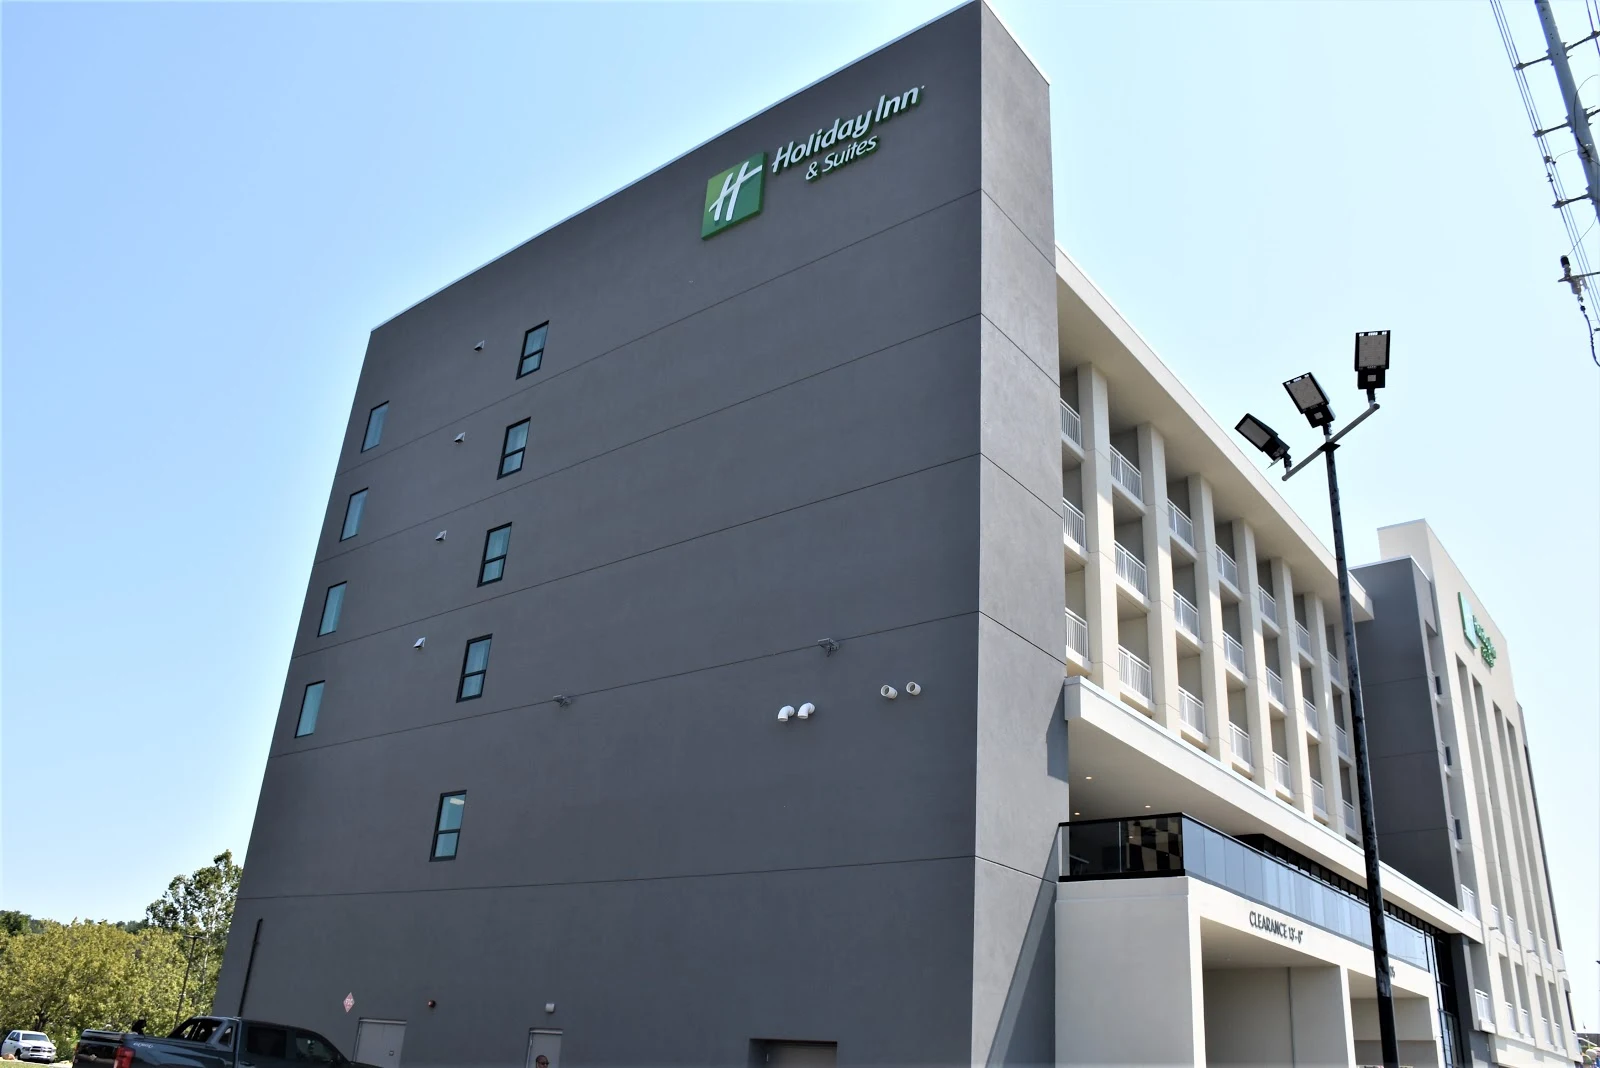 Holiday Inn & Suites in Pigeon Forge, TN